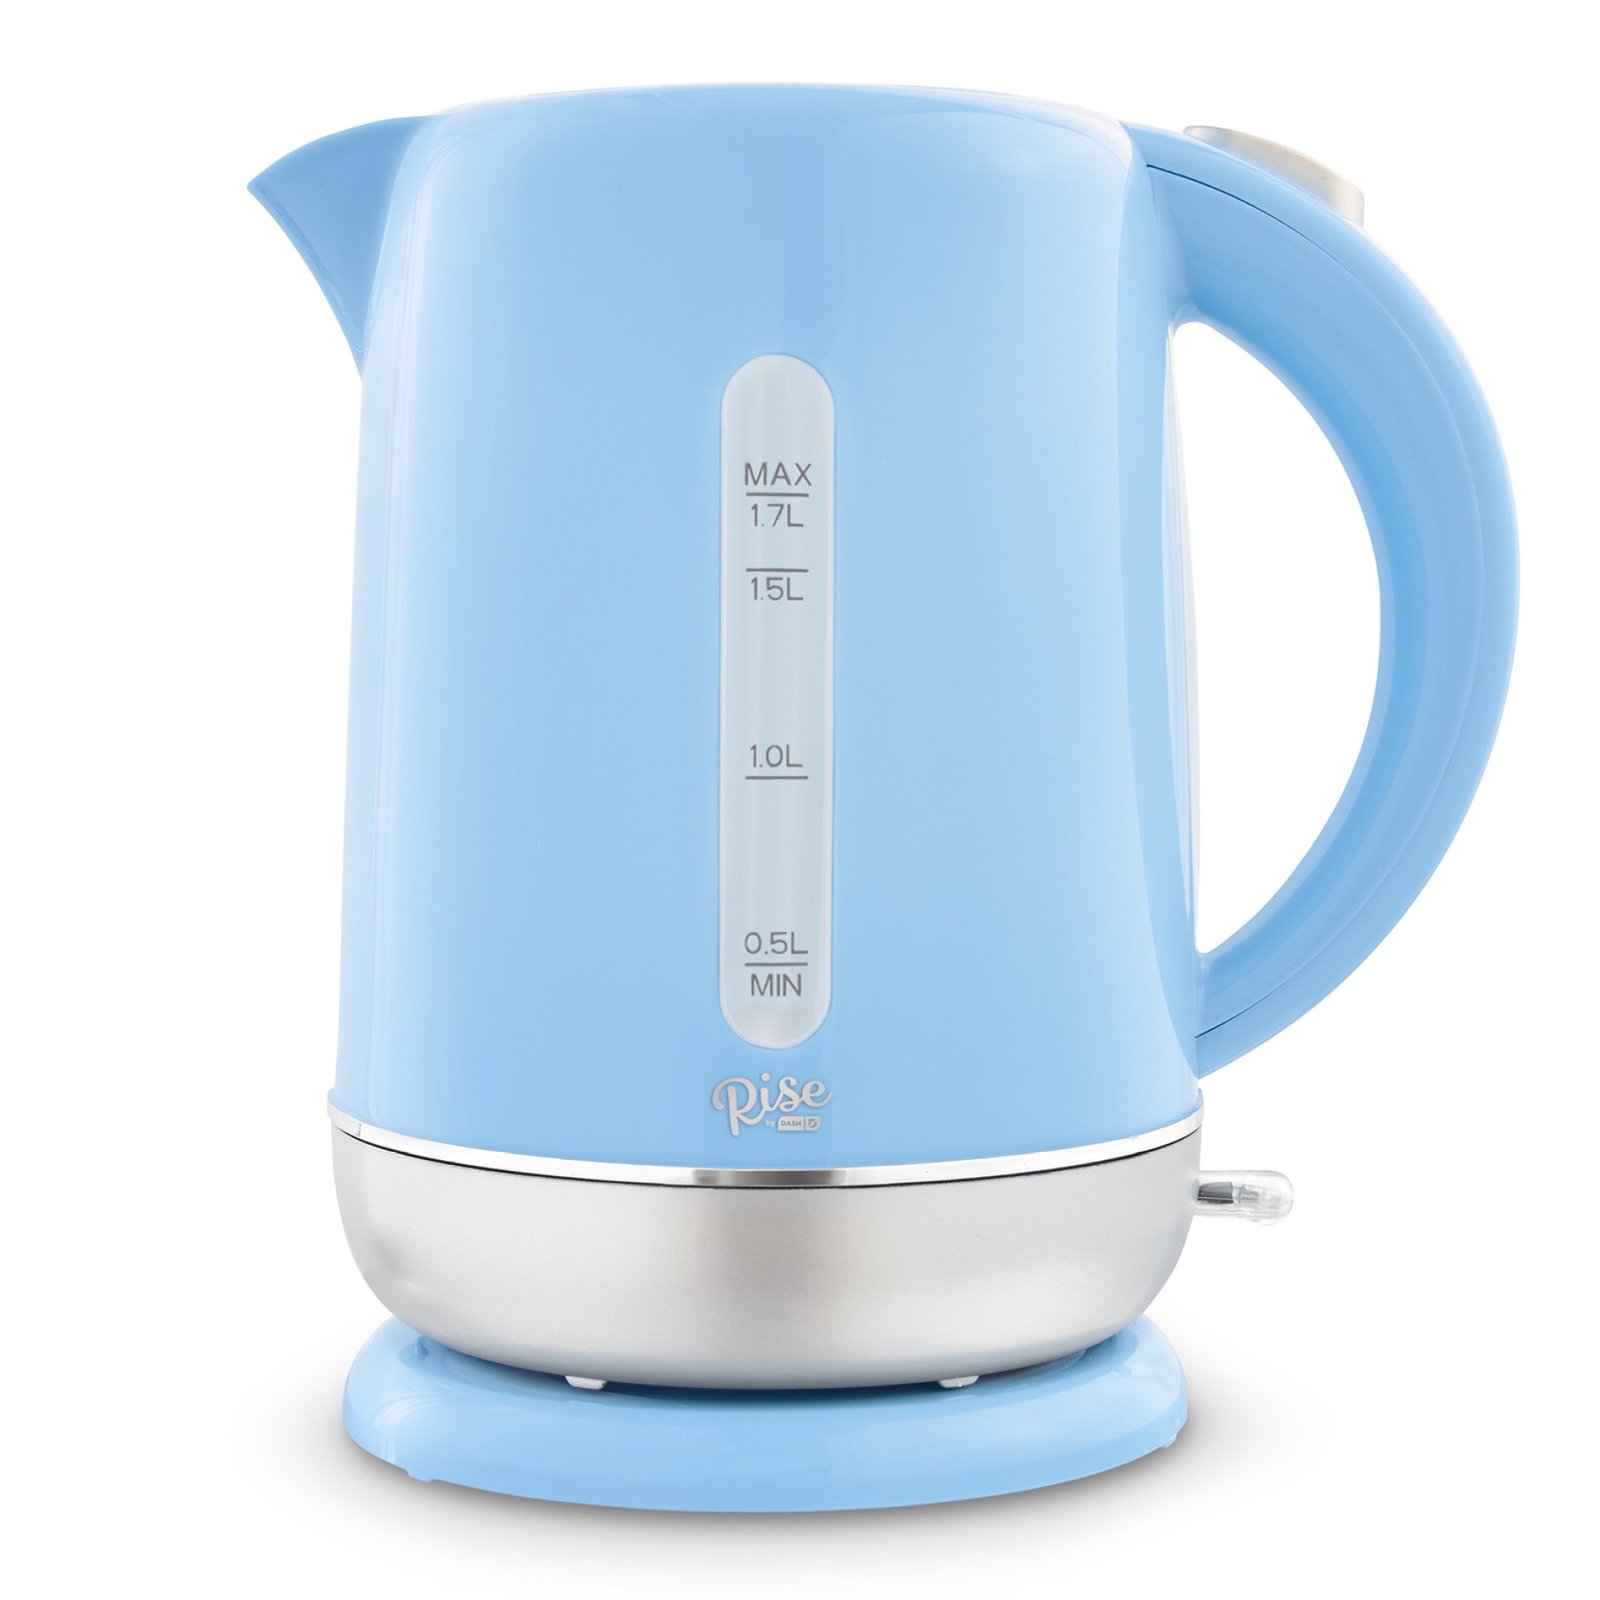 https://themarketdepot.com/wp-content/uploads/2023/01/Rise-By-Dash-1.7-Liter-Electric-Kettle-Water-Heater-with-Rapid-Boil-Cordless-Carafe-Auto-Shut-off-for-Coffee-Tea-Espresso-More-Blue-1.jpeg